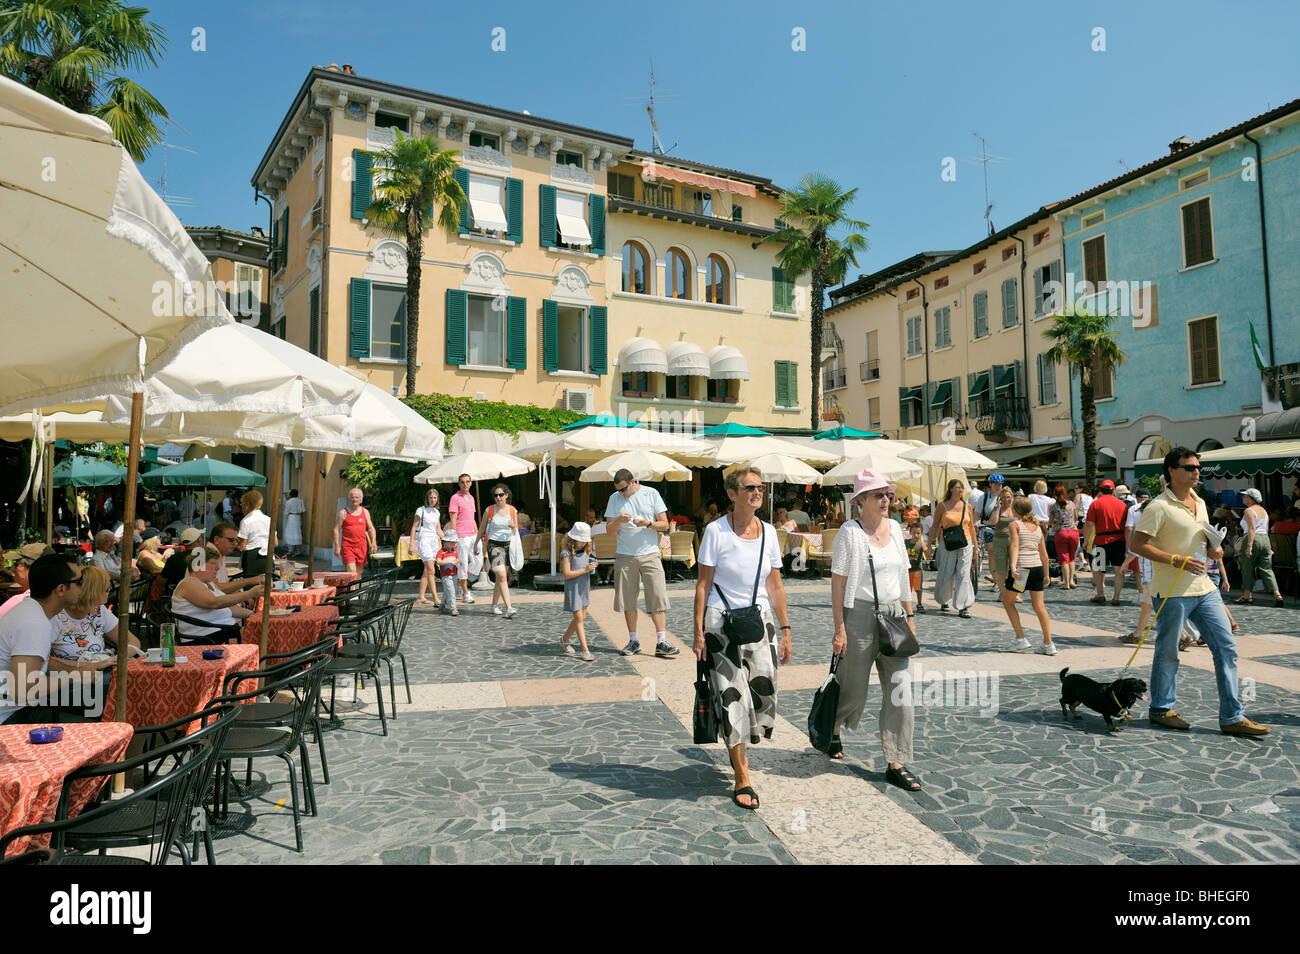 The holiday resort town of Sirmione on Lake Garda, Lombardy, Italy. Street cafes on the Piazza Giosue Carducci. Lago di Garda. Stock Photo